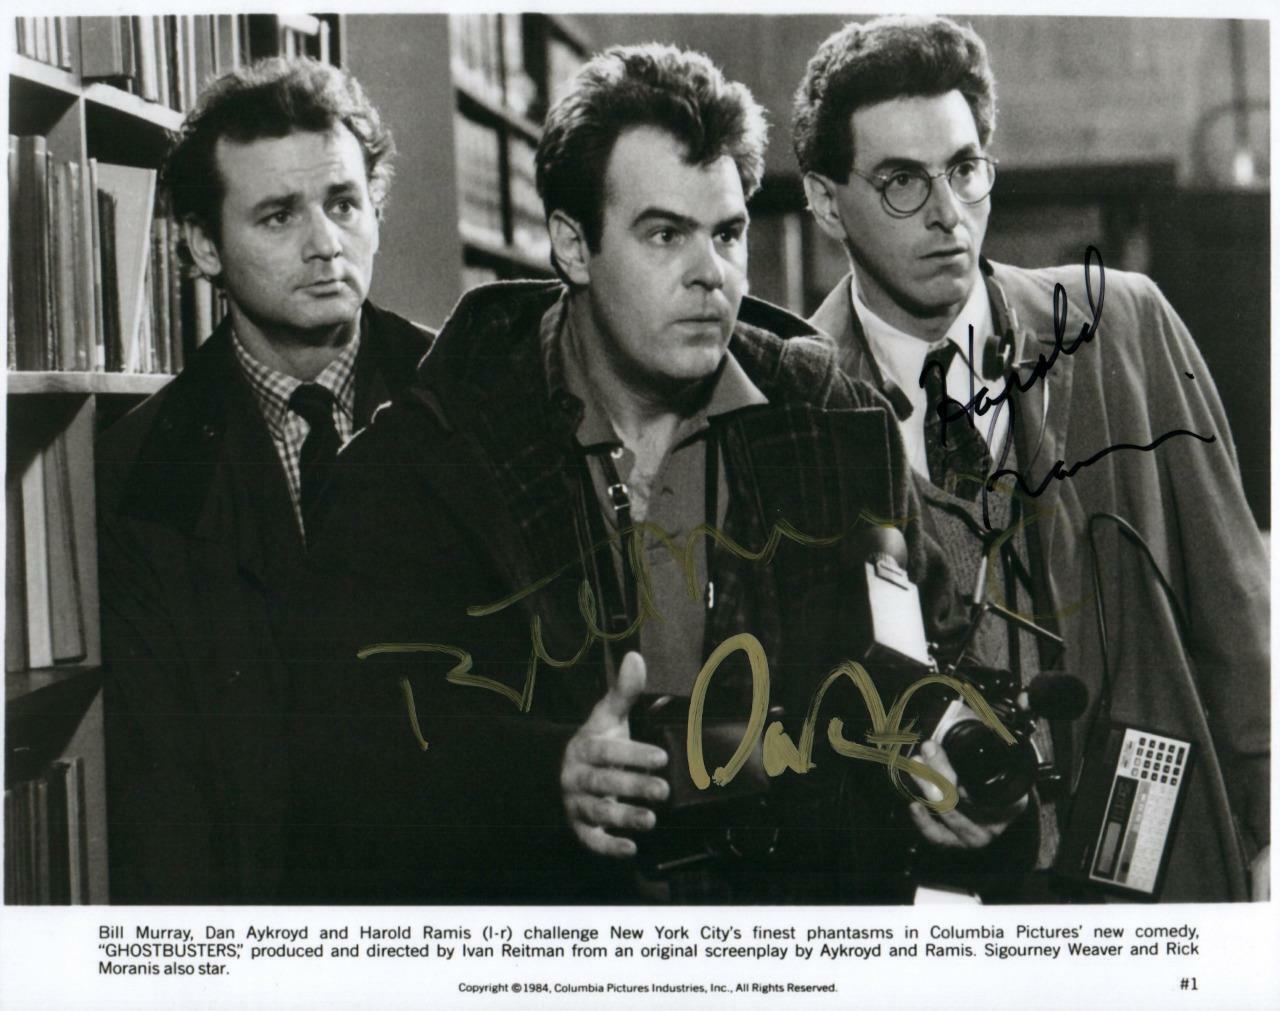 Harold Ramis Murray Aykroyd signed 8x10 Photo Poster painting autograph Pic autographed and COA